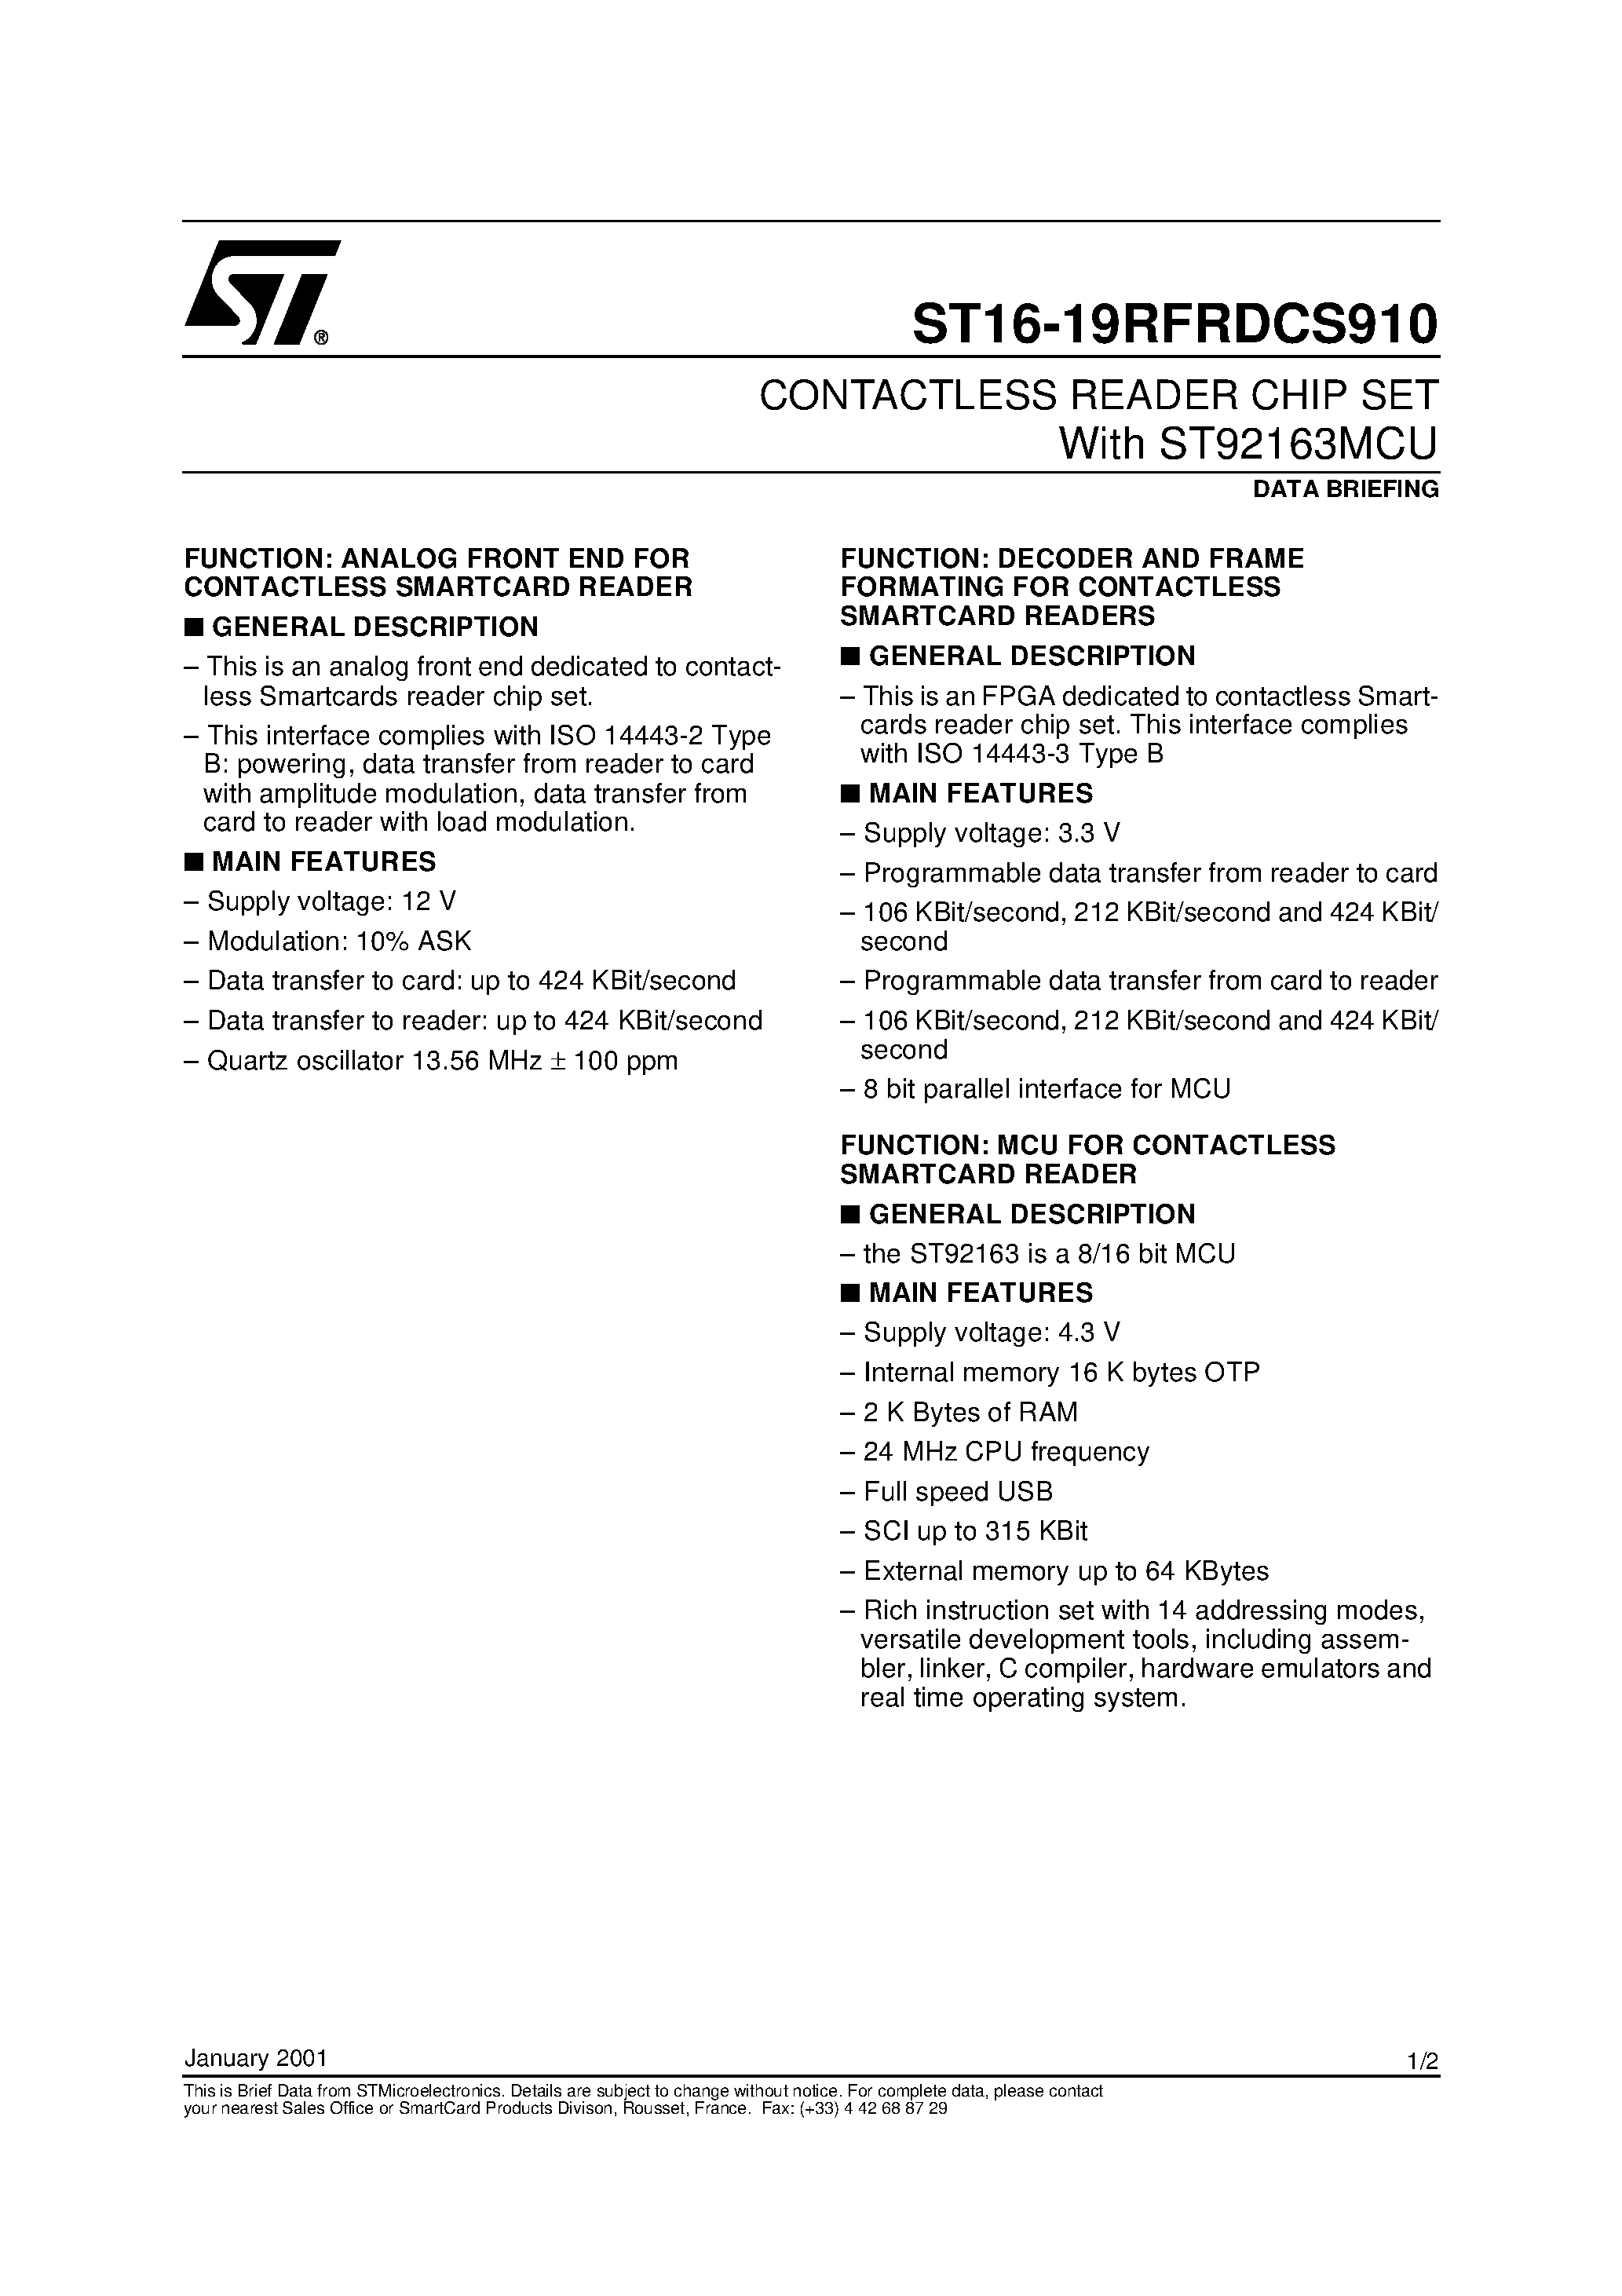 Datasheet ST16-19RFRDCS910 - CONTACTLESS READER CHIP SET With ST92163MCU page 1